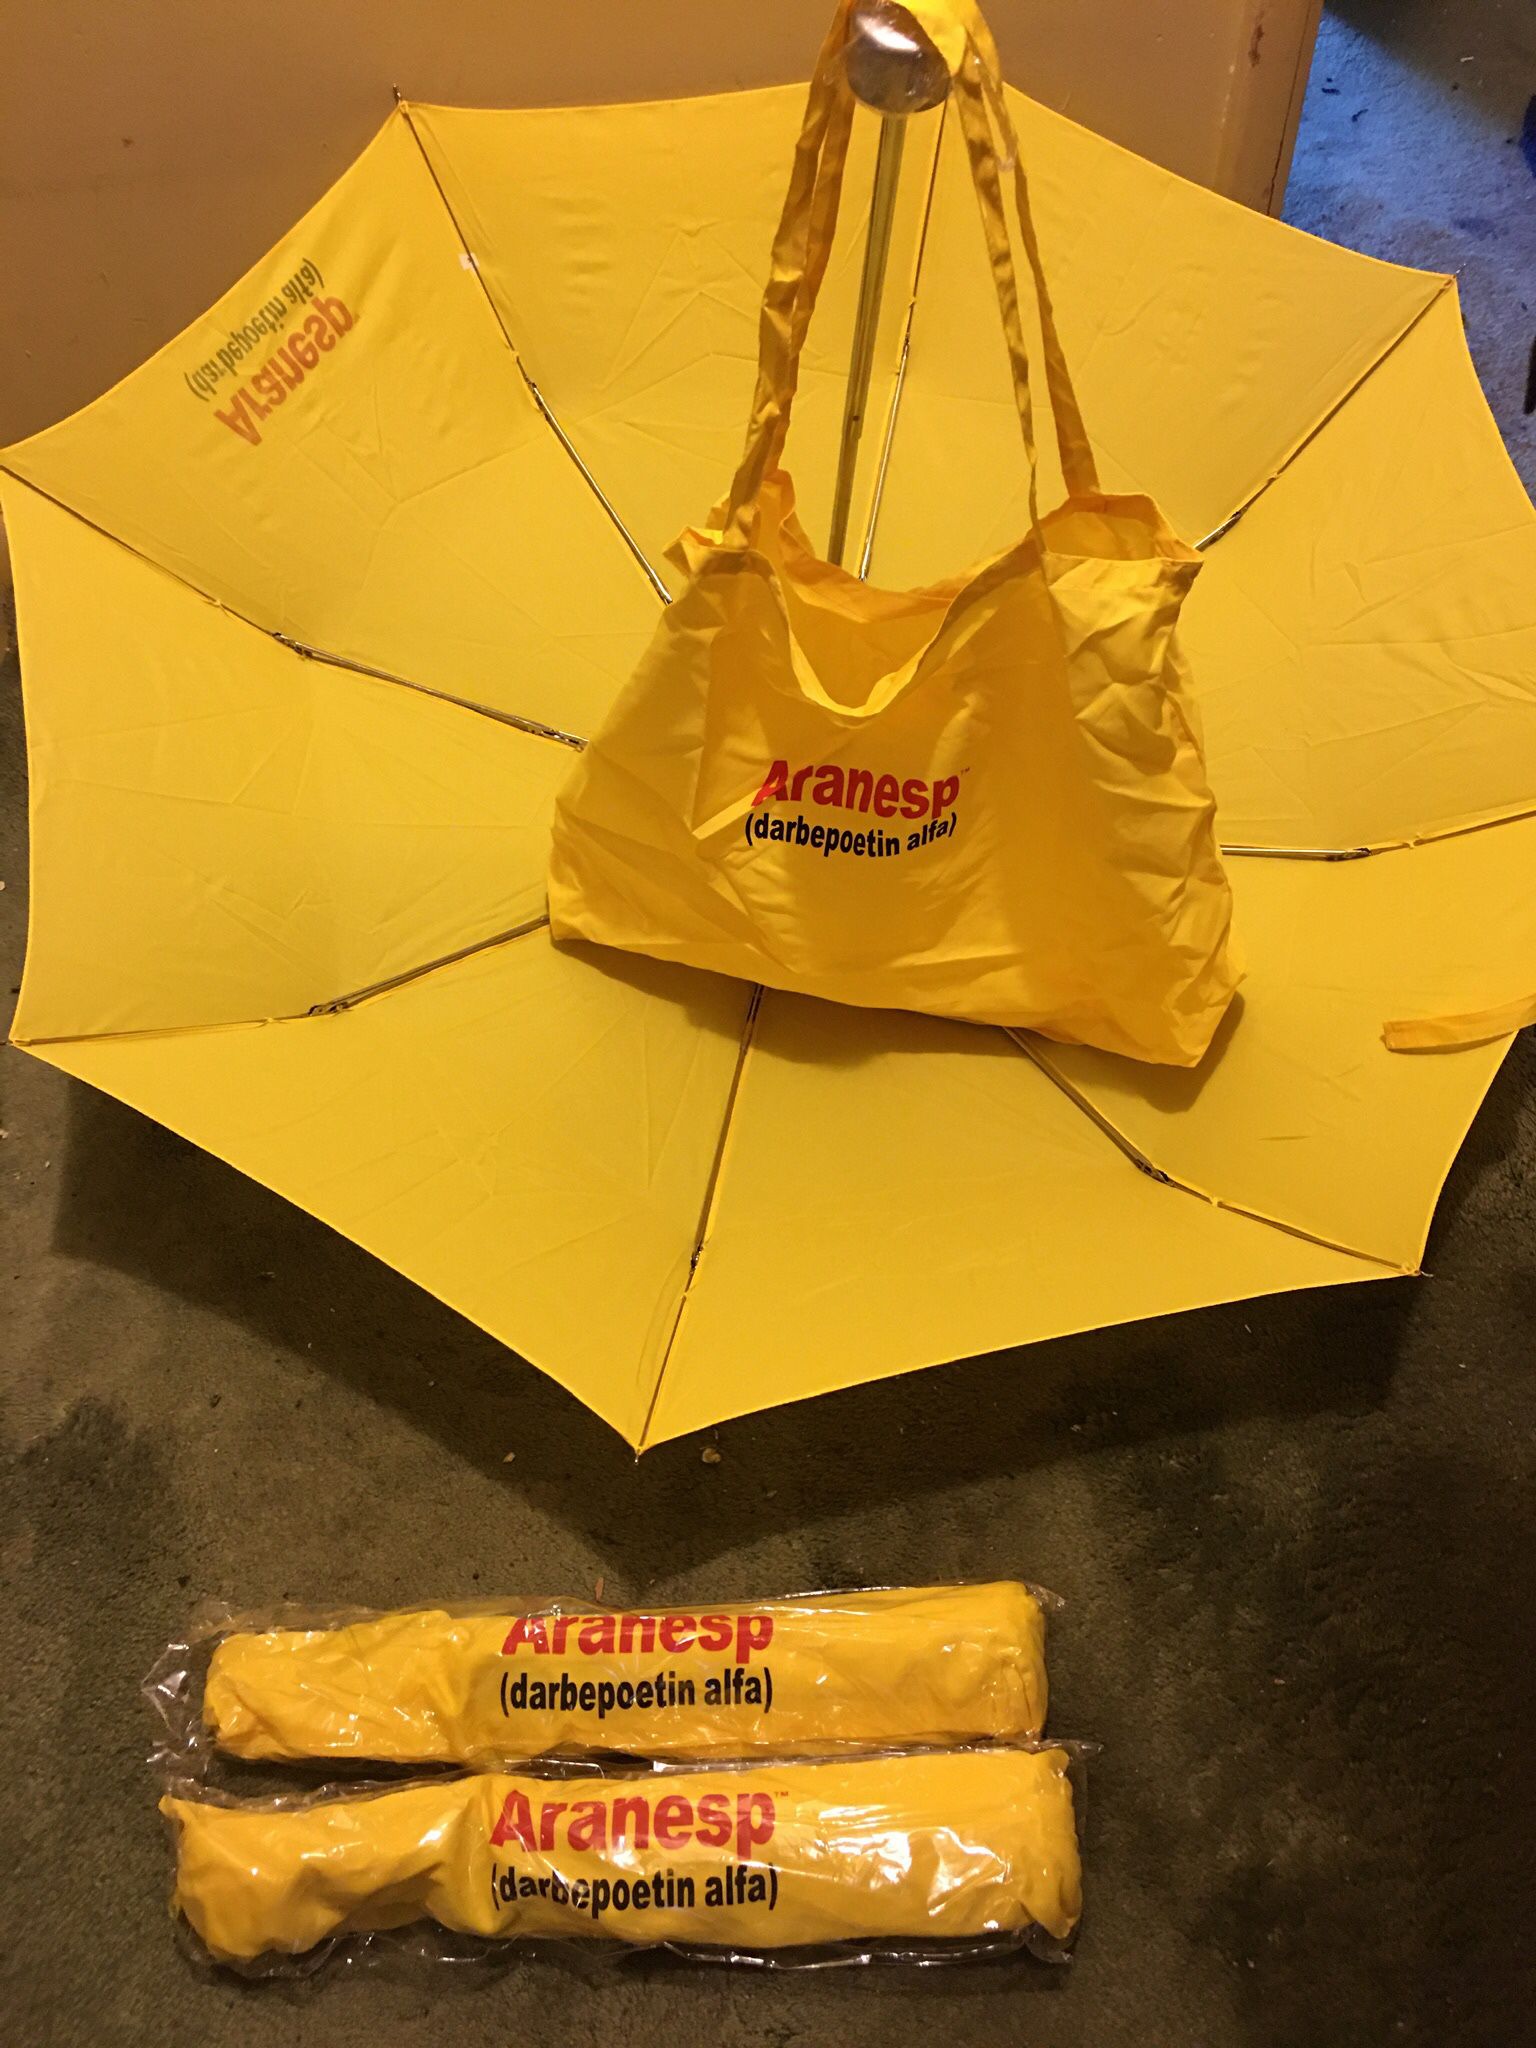 BRAND NEW 2-UMBRELLA WITH CARRIER BAG $20.00